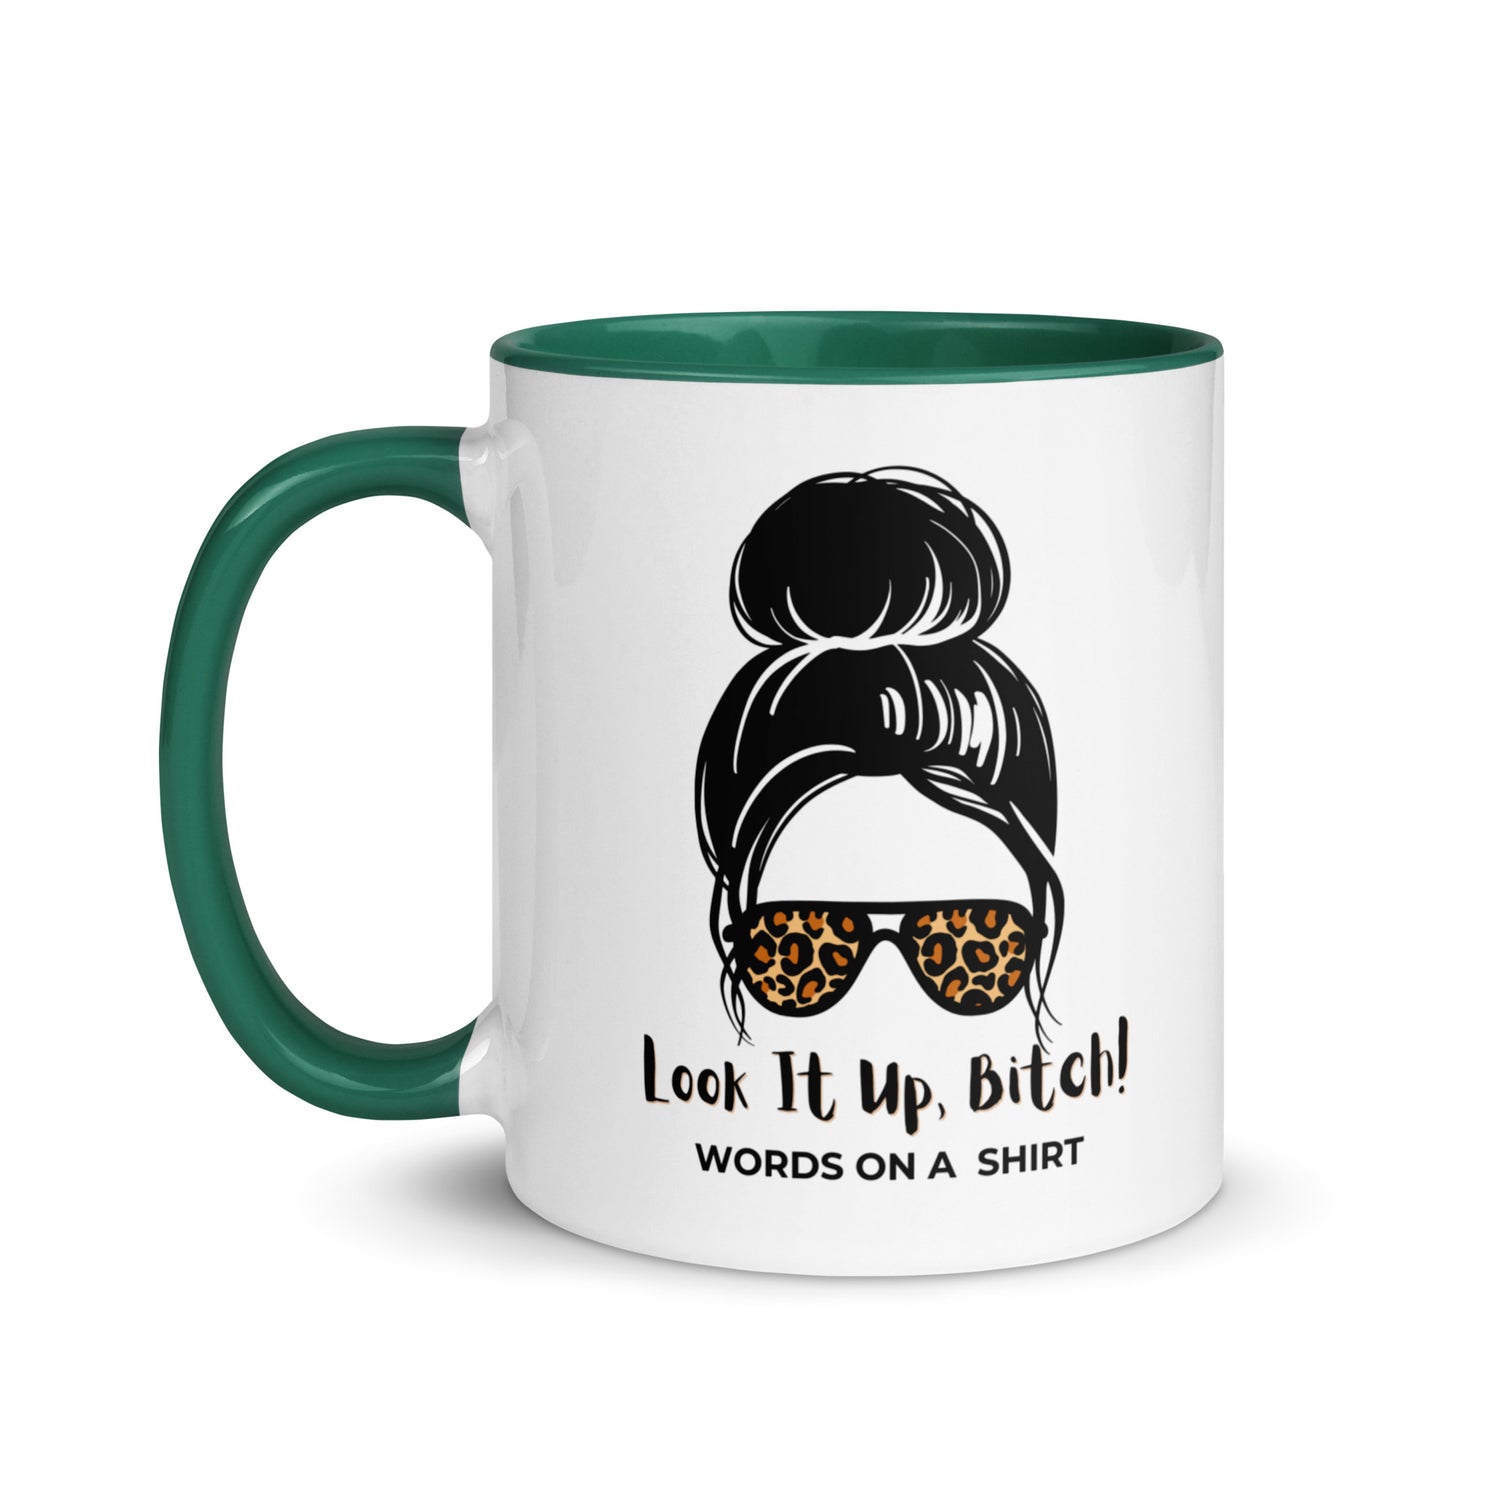 Jazz up your morning coffee or tea routine with a pop of color! These ceramic mugs not only boast a stunning design, but also feature a bright rim, handle, and interior, bringing a touch of pizzazz to your mug collection. Look It Up, Bitch!